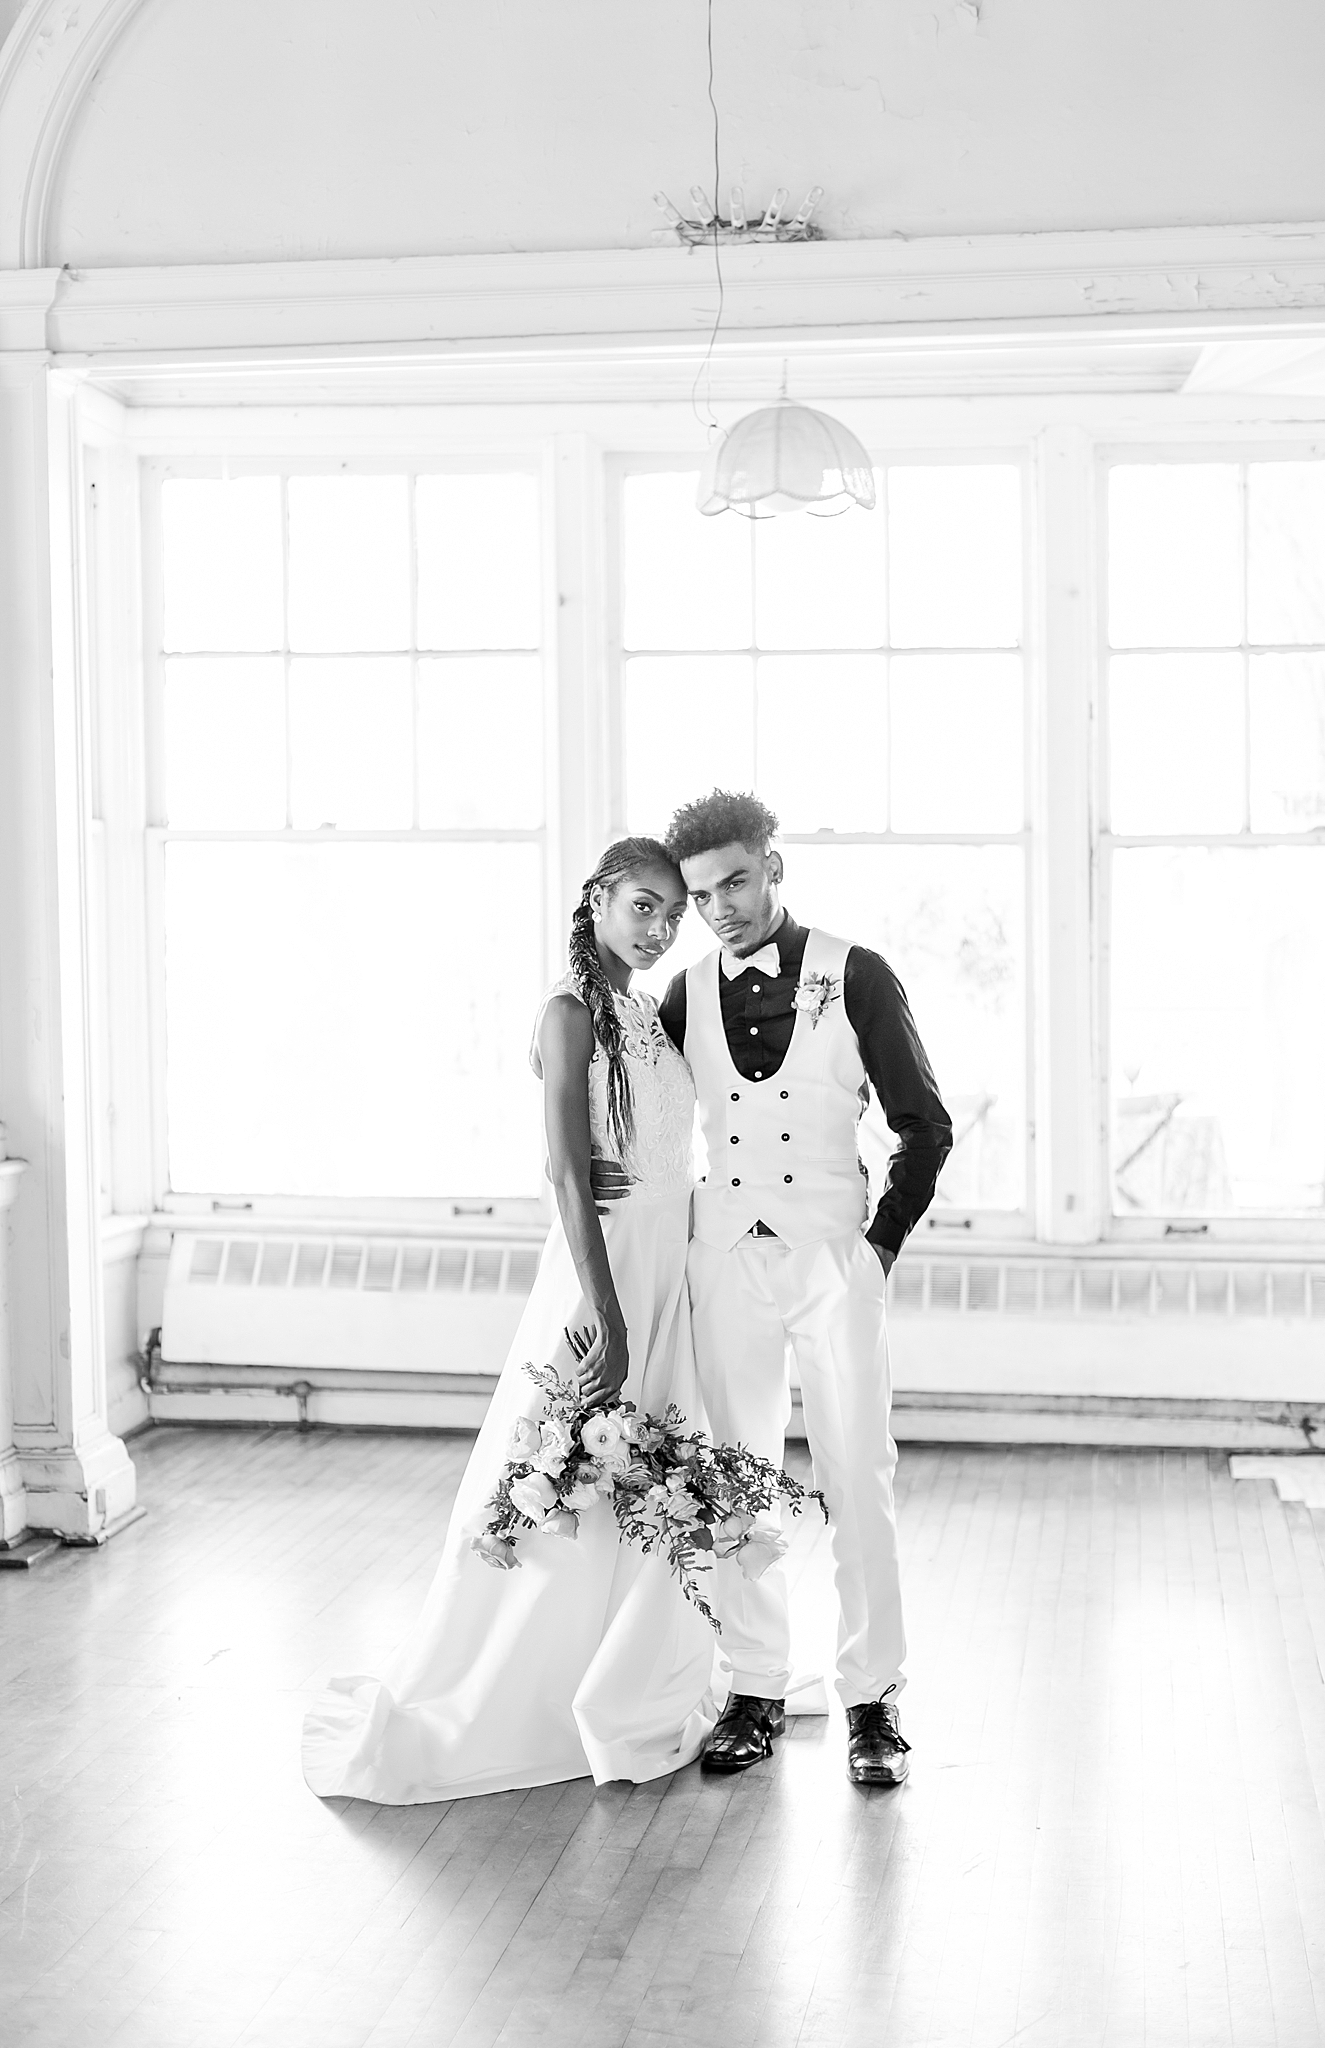 intimate-elopement-wedding-photography-at-belle-isle-boat-house-detroit-mi-by-courtney-carolyn-photography_0027.jpg